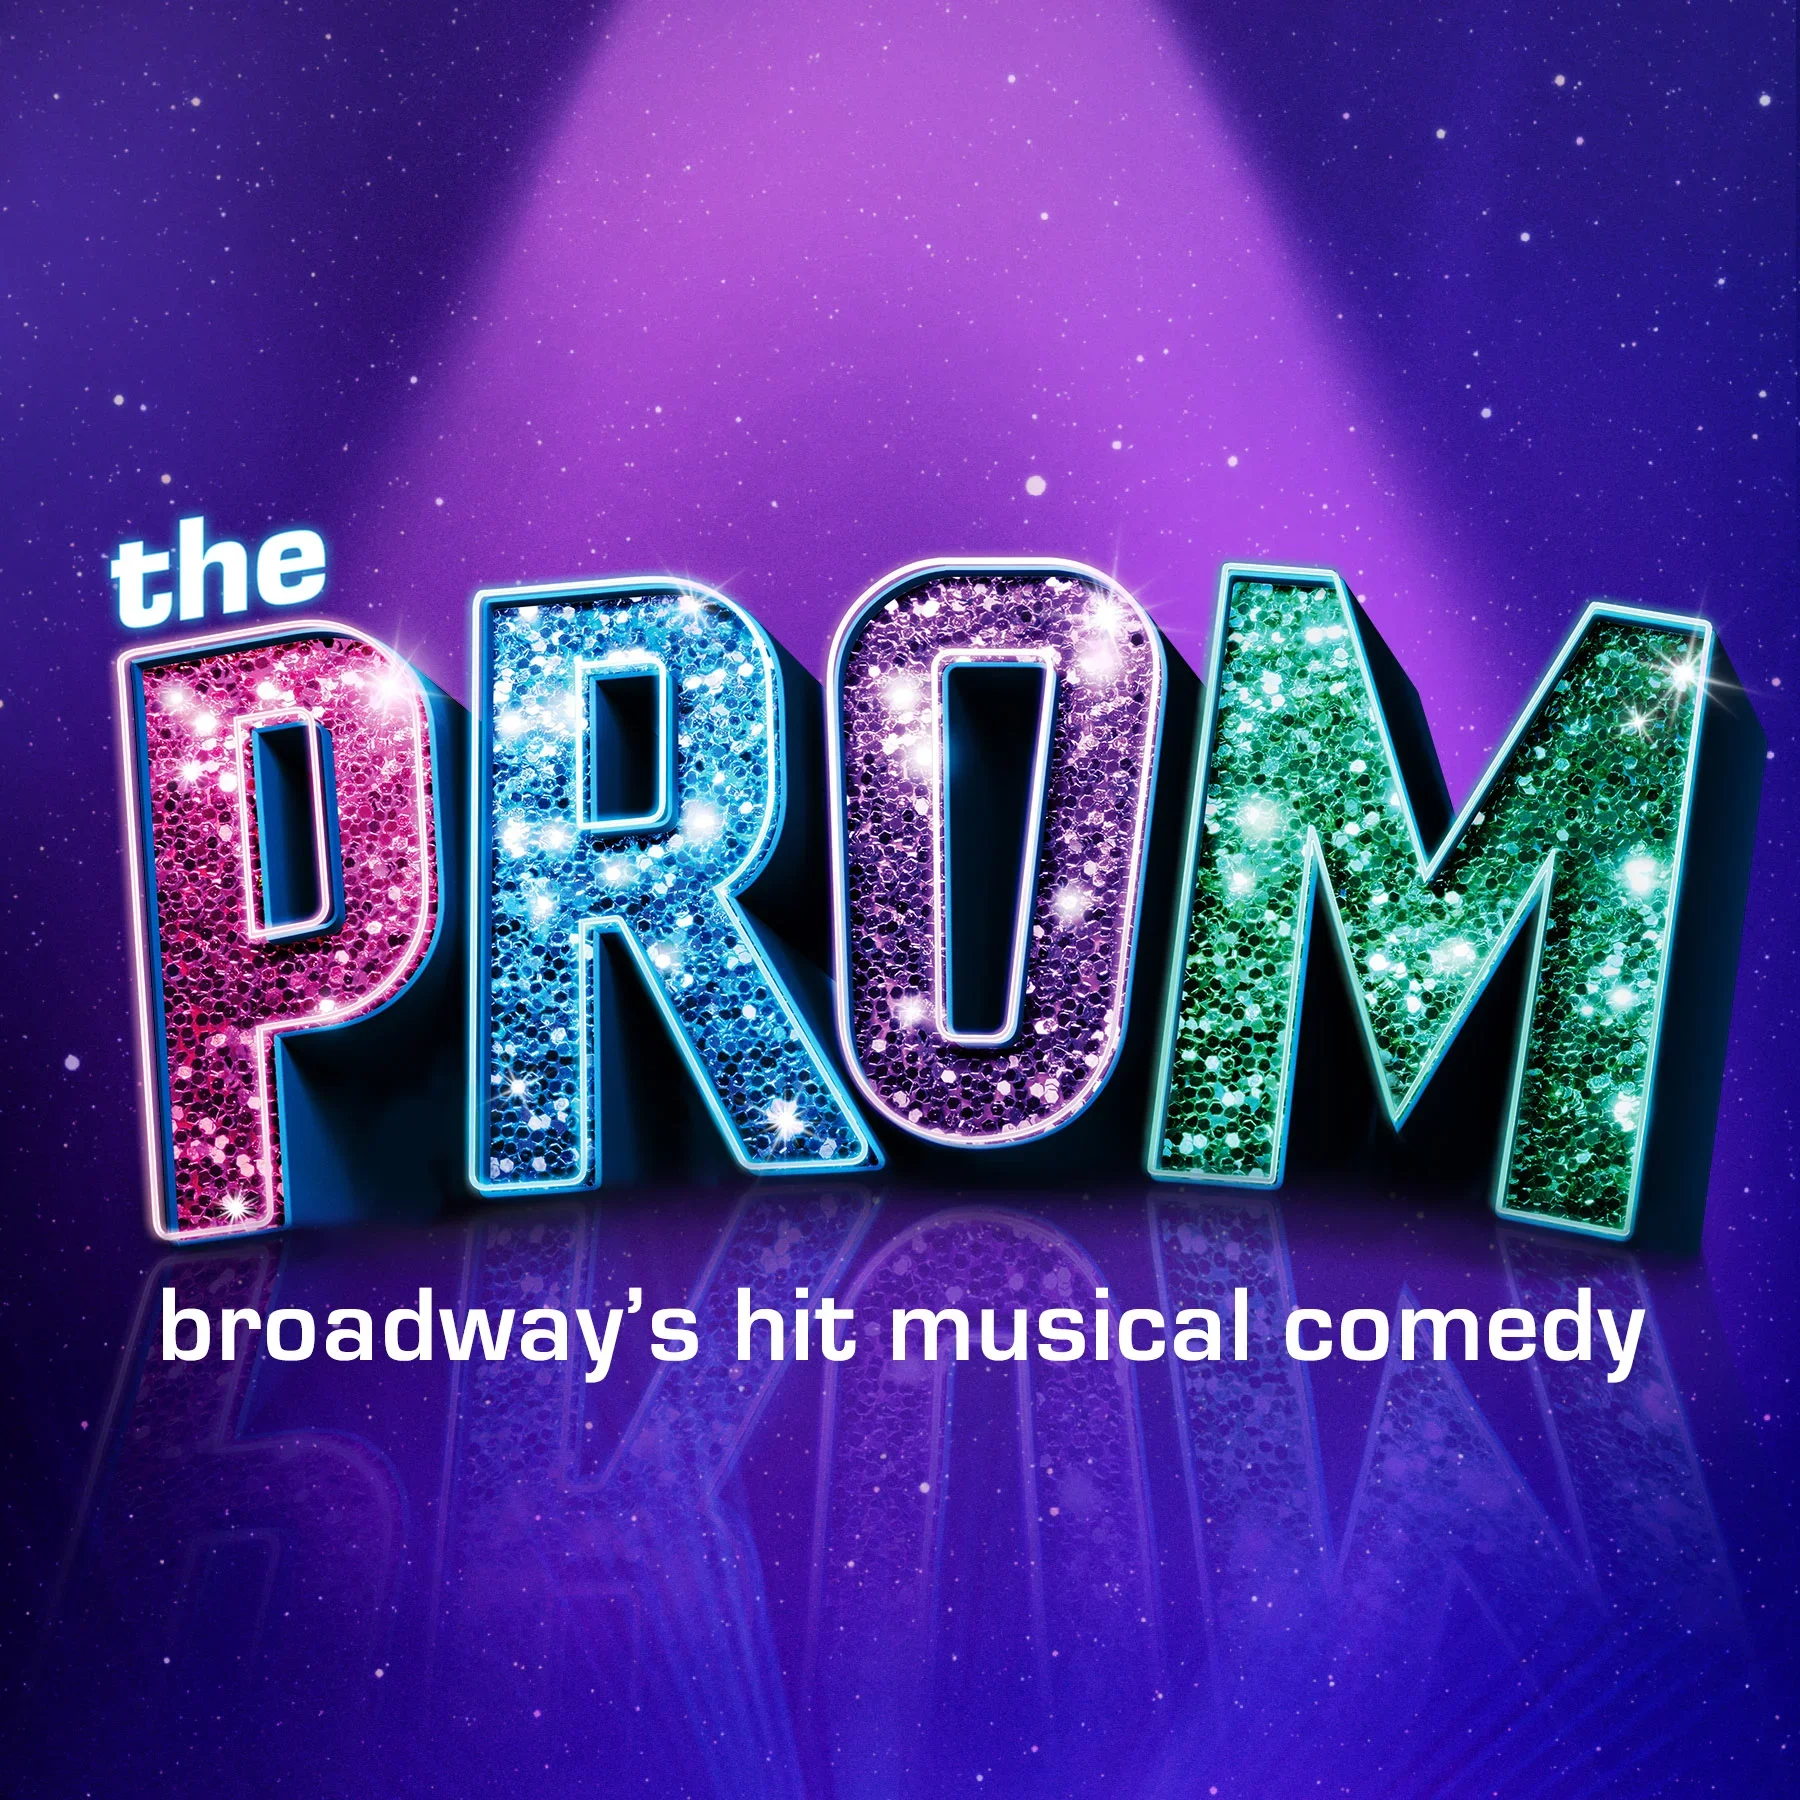 "The Prom" - by Chad Beguelin, Bob Martin & Matthew Sklar - Theatre at the Mount (Gardner, MA.) - AUDITIONS